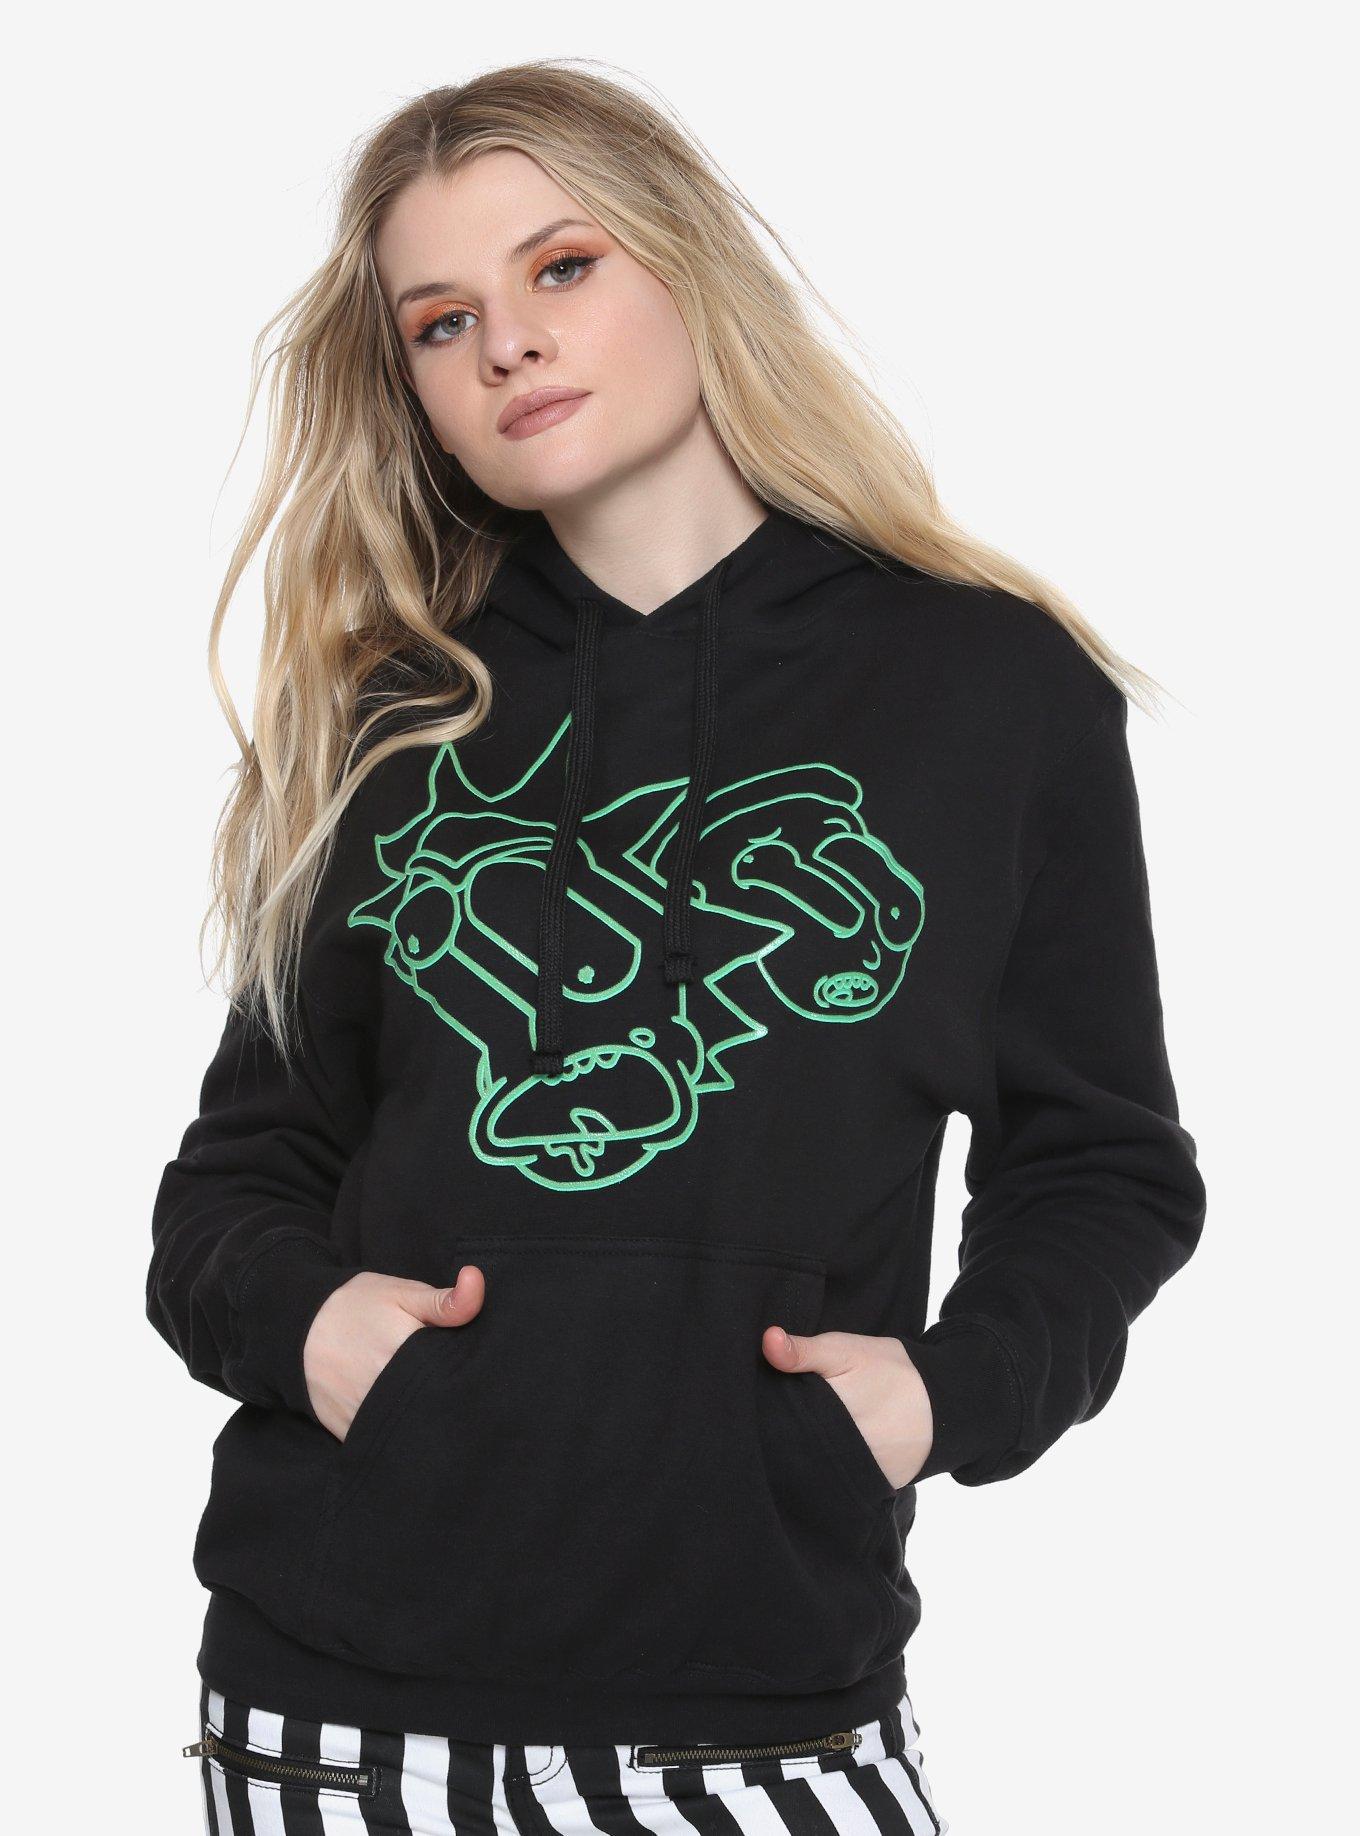 Rick And Morty Neon Green Outline Girls Hoodie, BLACK, hi-res